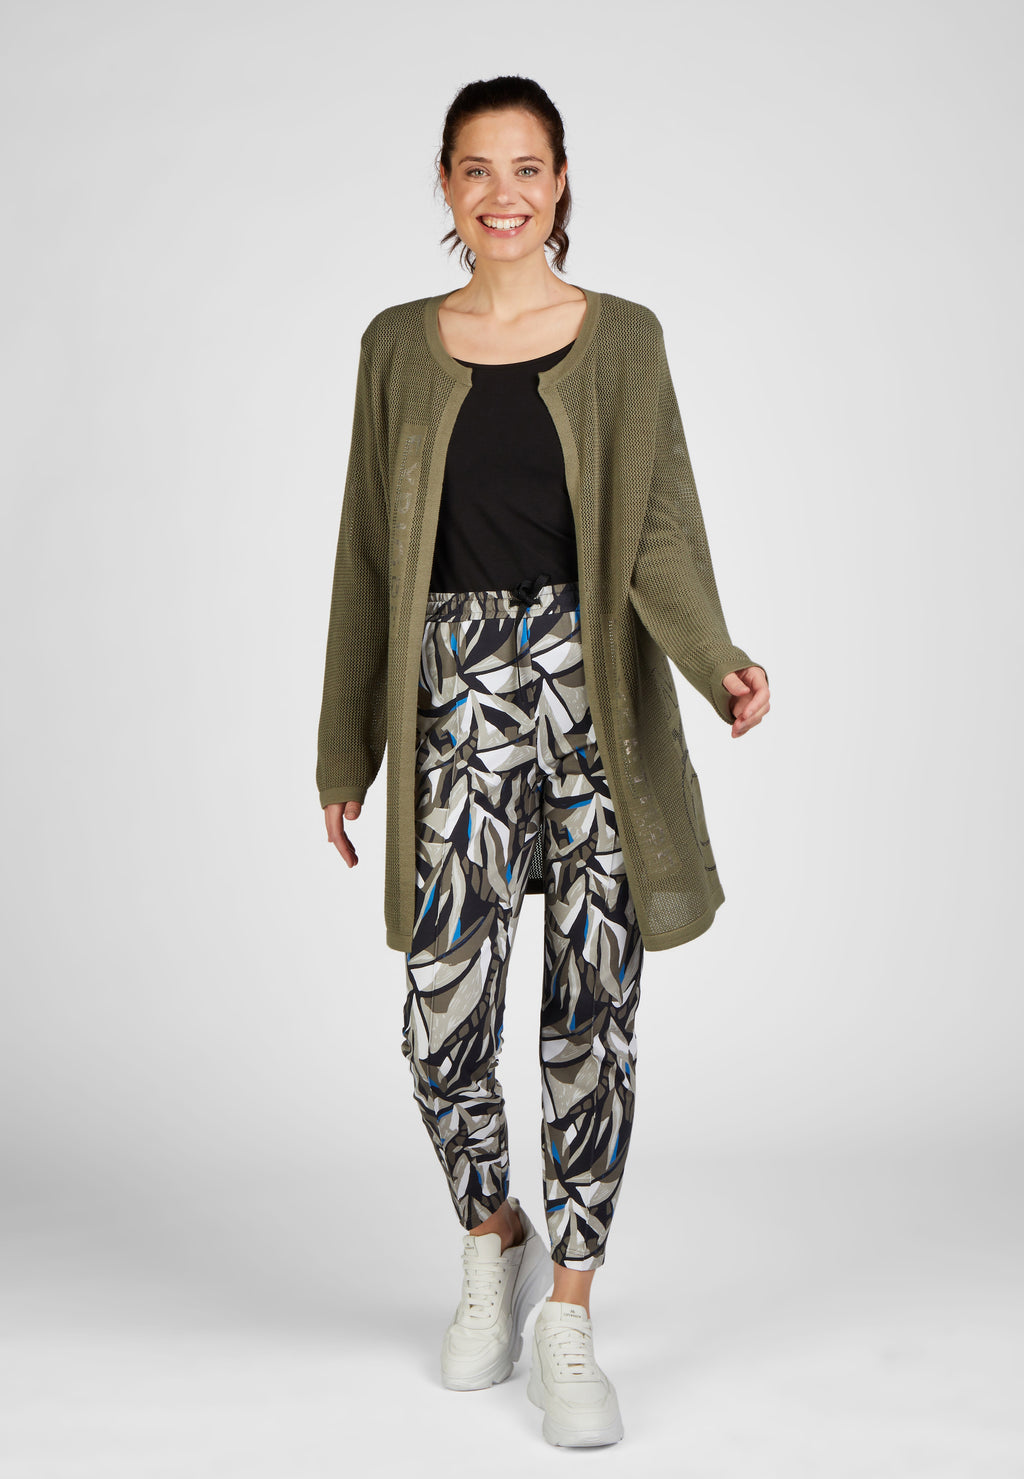 Rabe herbal garden collection longline edge to edge cardigan in khaki, product code 52-221520